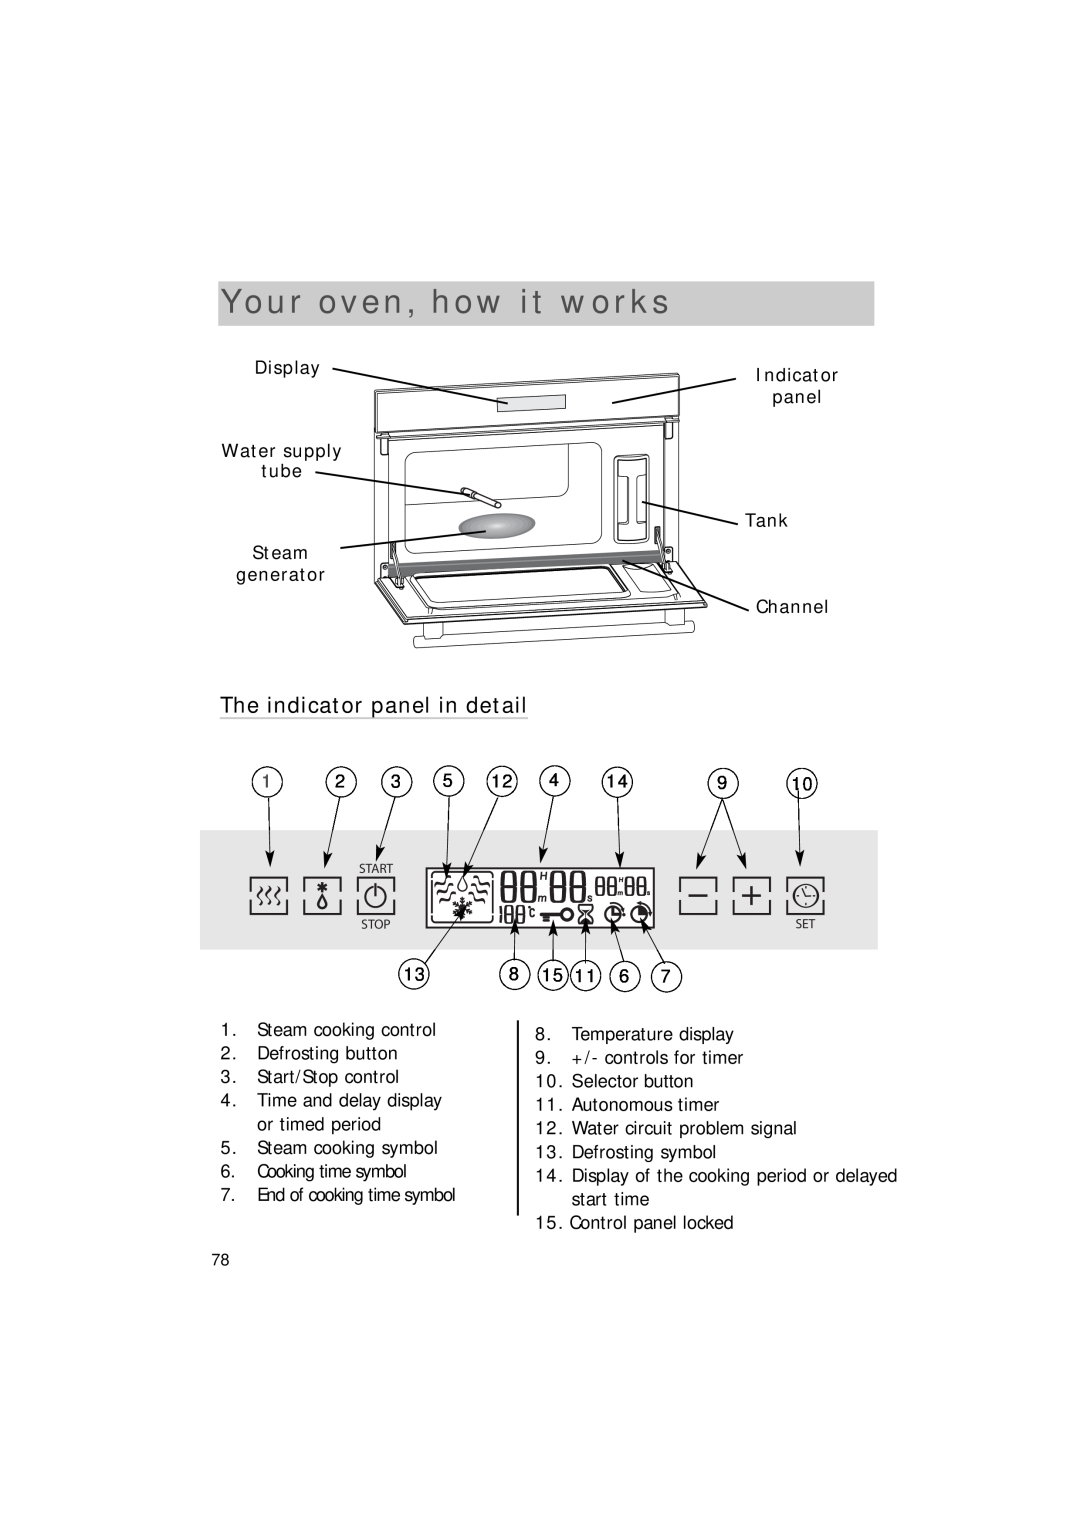 Hotpoint SEO100 manual Your oven, how it works, The indicator panel in detail, Selector button 